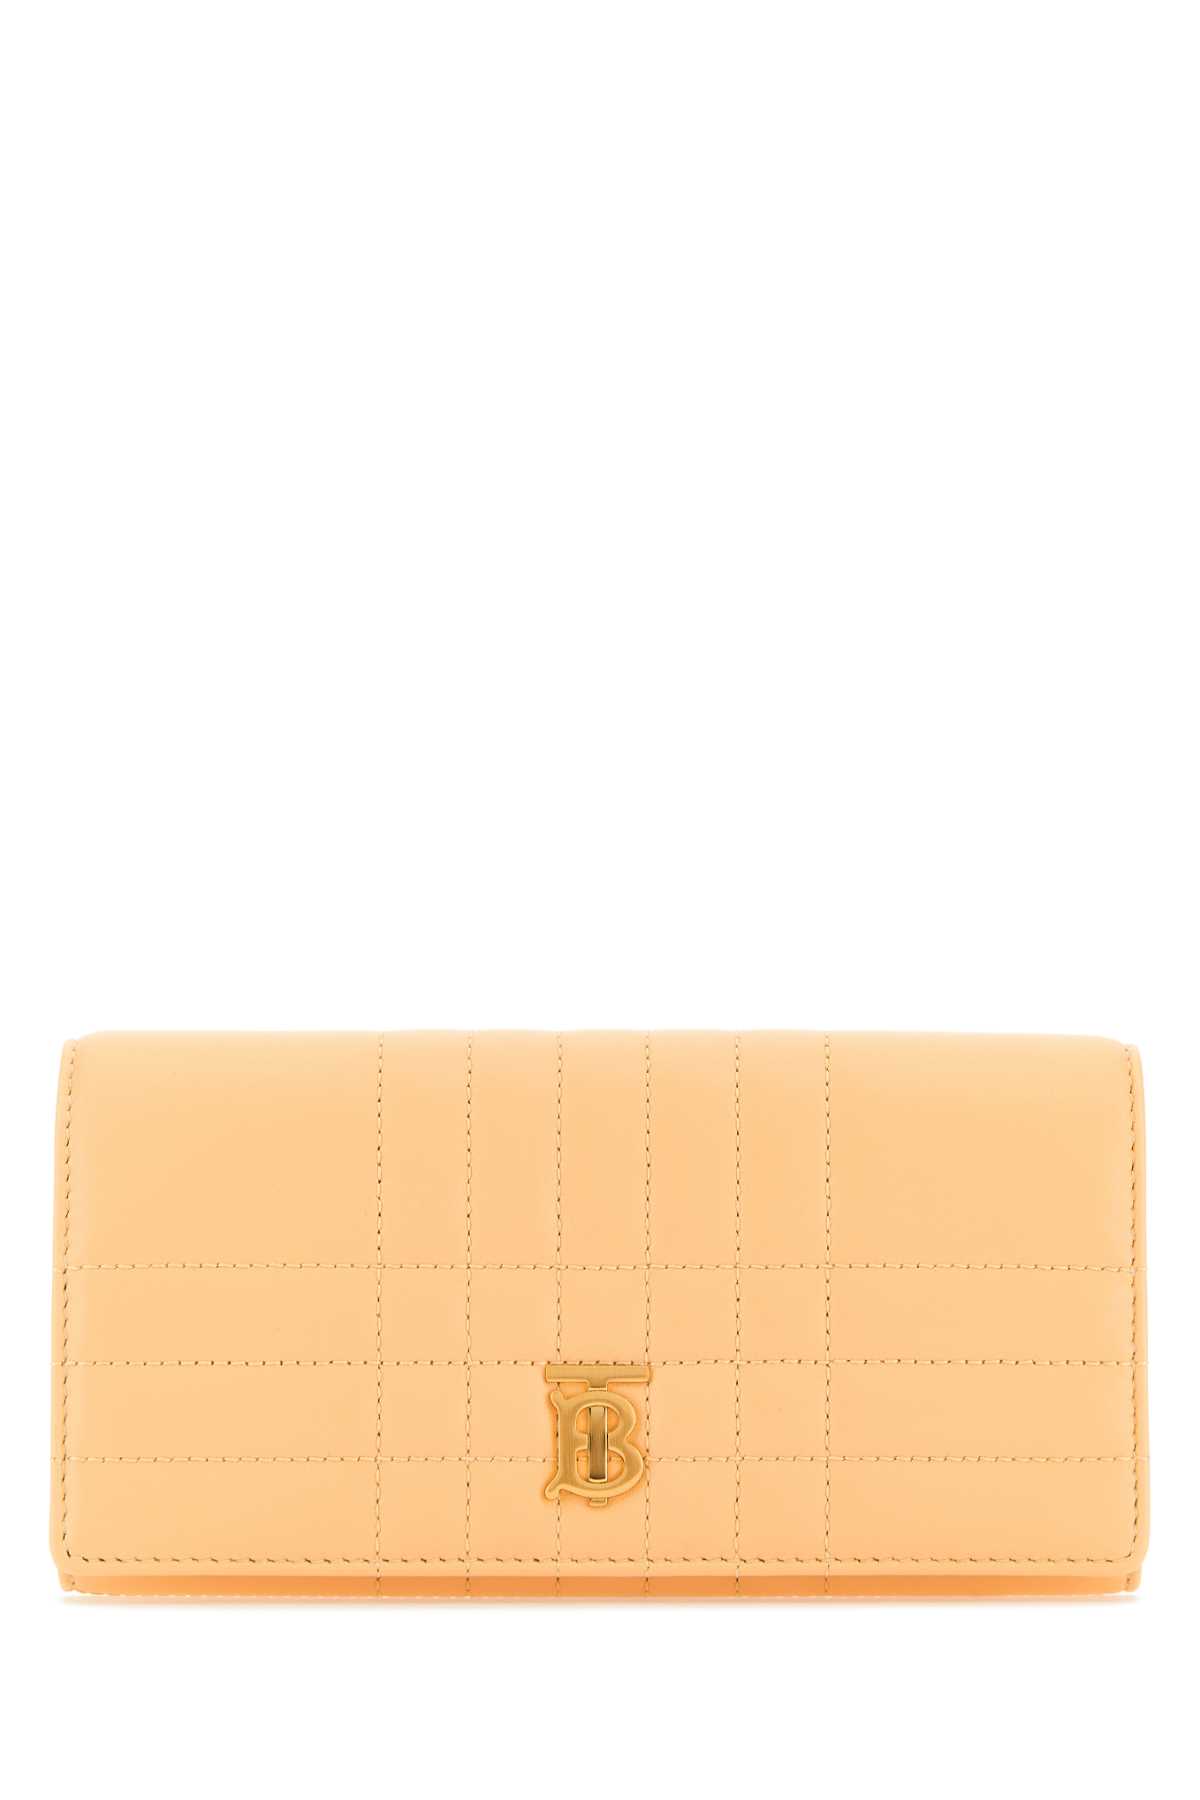 Burberry Peach Leather Lola Wallet